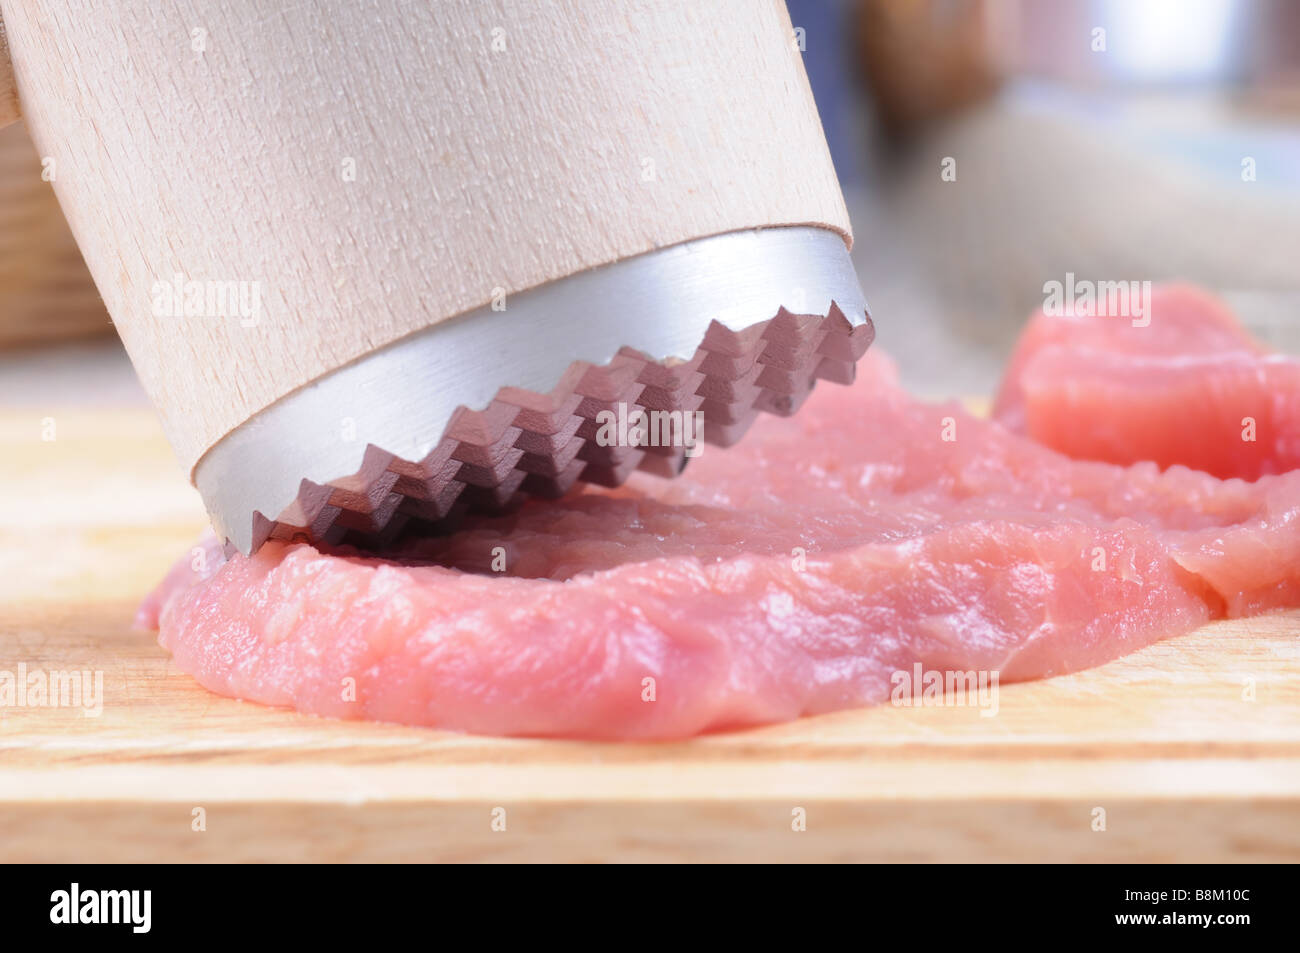 Tenderization of fresh pork steaks on wooden chopping board. Detail with small DOF. Stock Photo